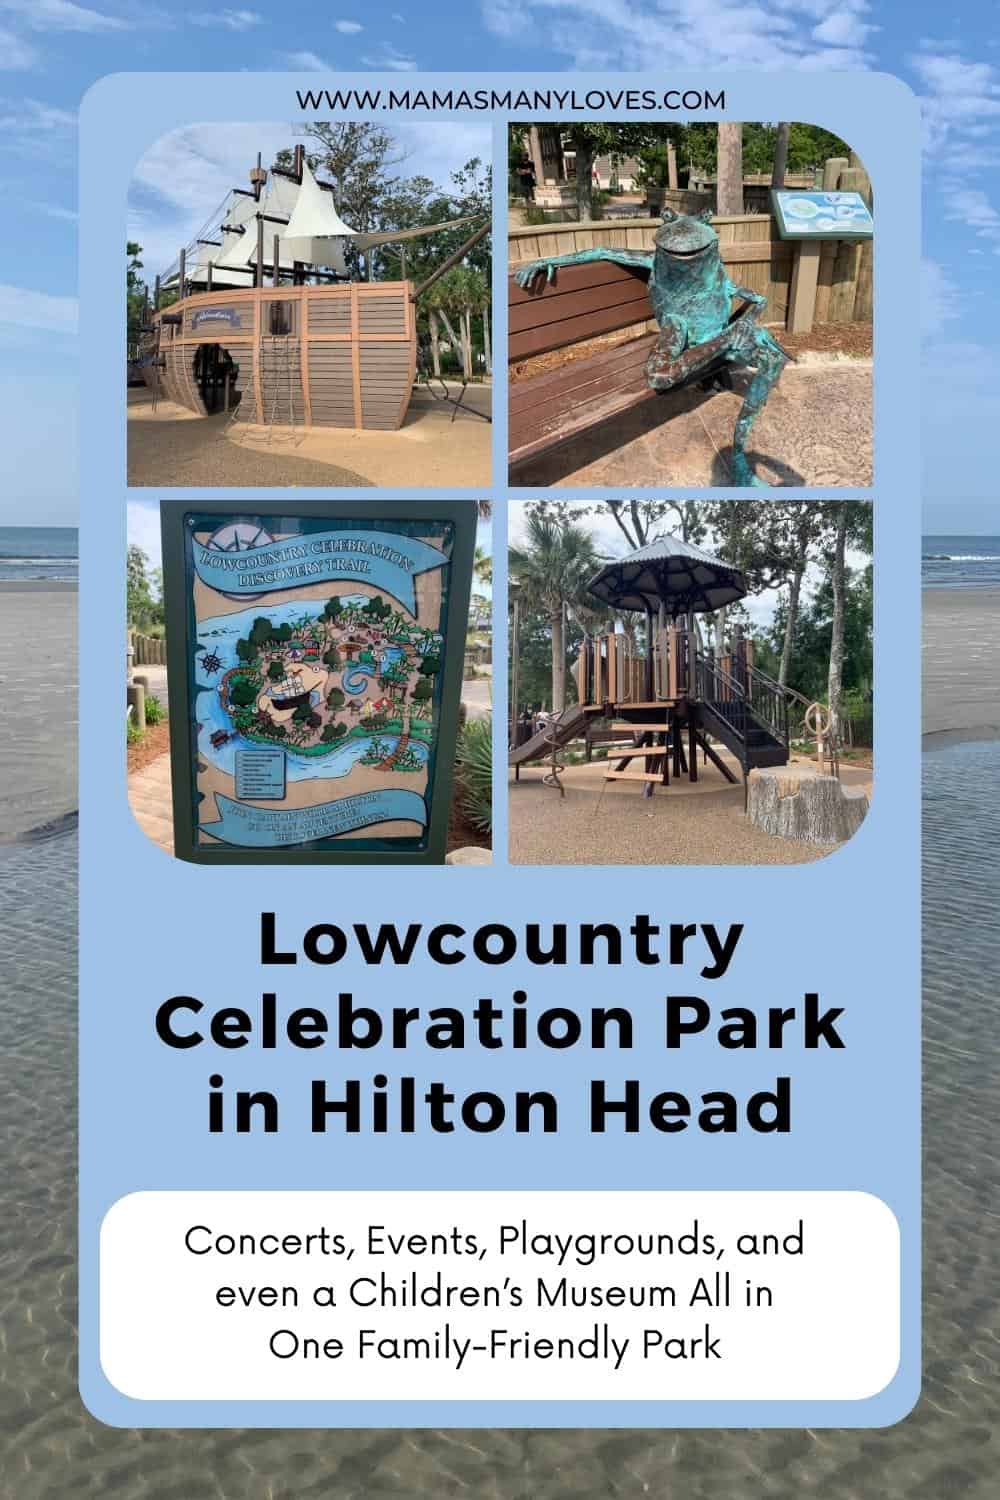 Photos taken at Lowcountry Celebration Park in Hilton Head of Adventure Playground, Lowcountry Celebration Discovery Trail with text overlay "Lowcountry Celebration Park in Hilton Head- Concerts, Events, Playgrounds, and 
even a Children’s Museum All in 
One Family-Friendly Park"